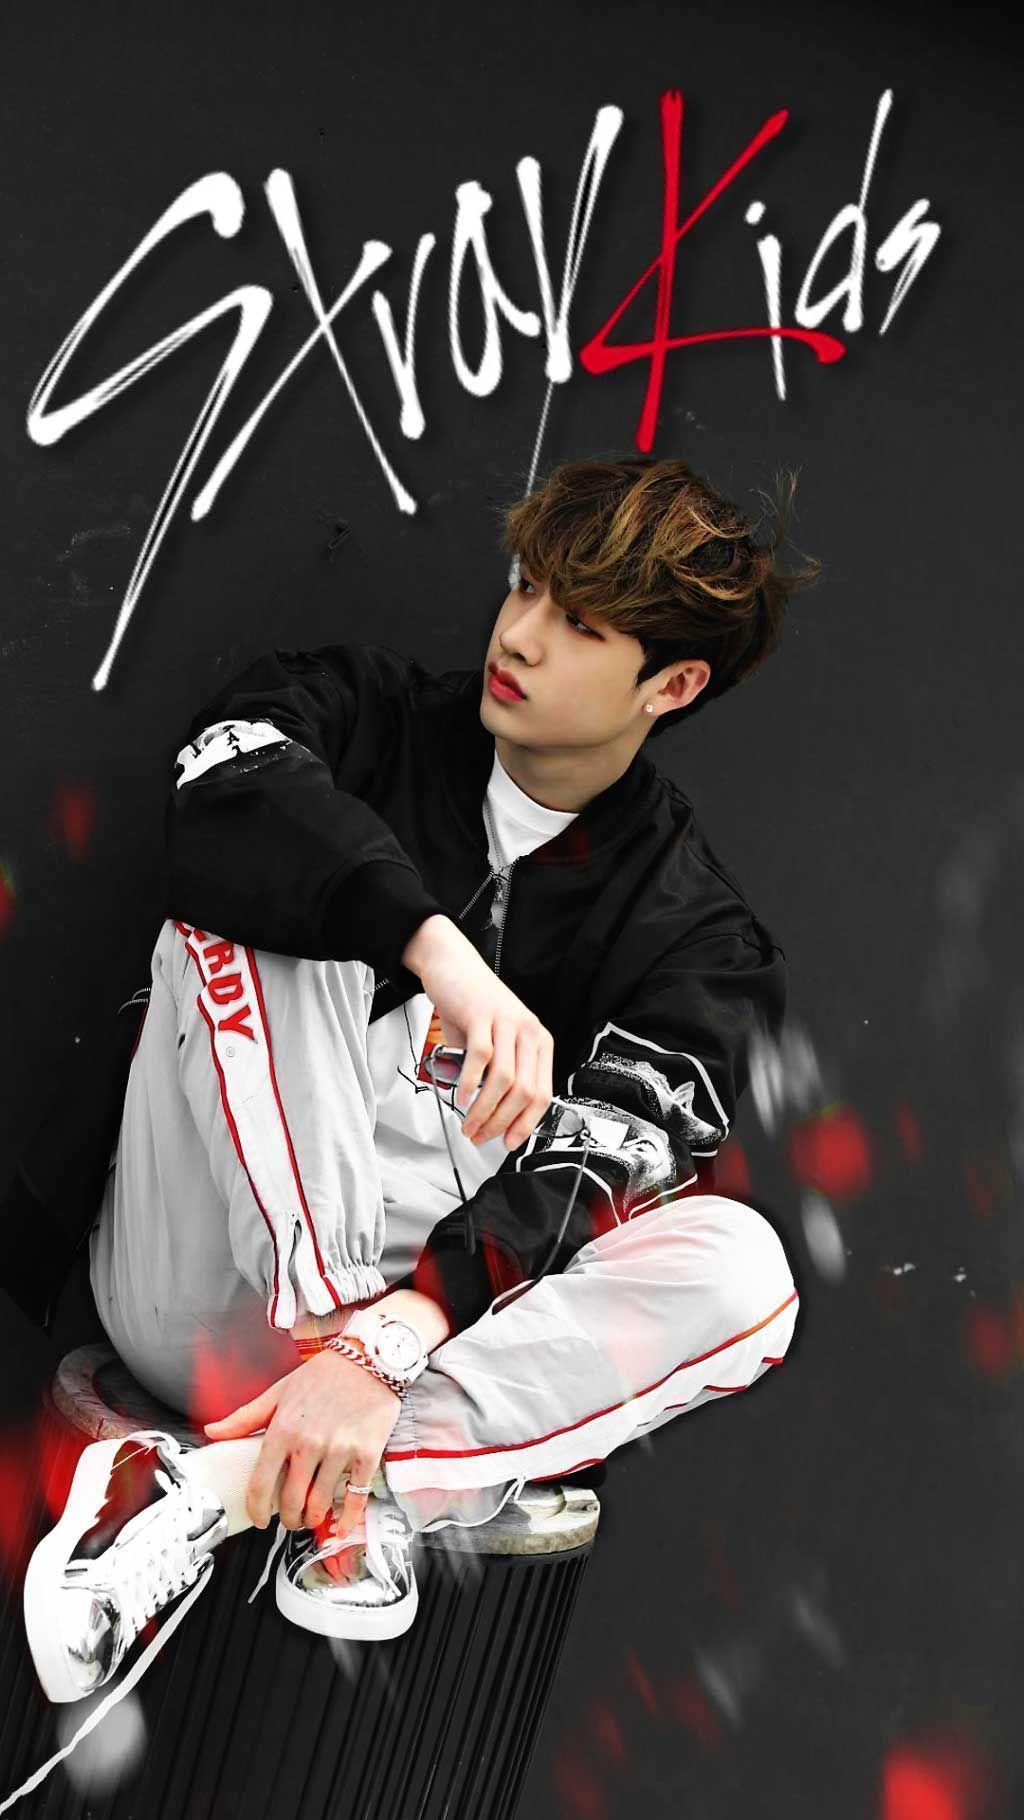 Stray Kids Wallpaper 2020 for Android